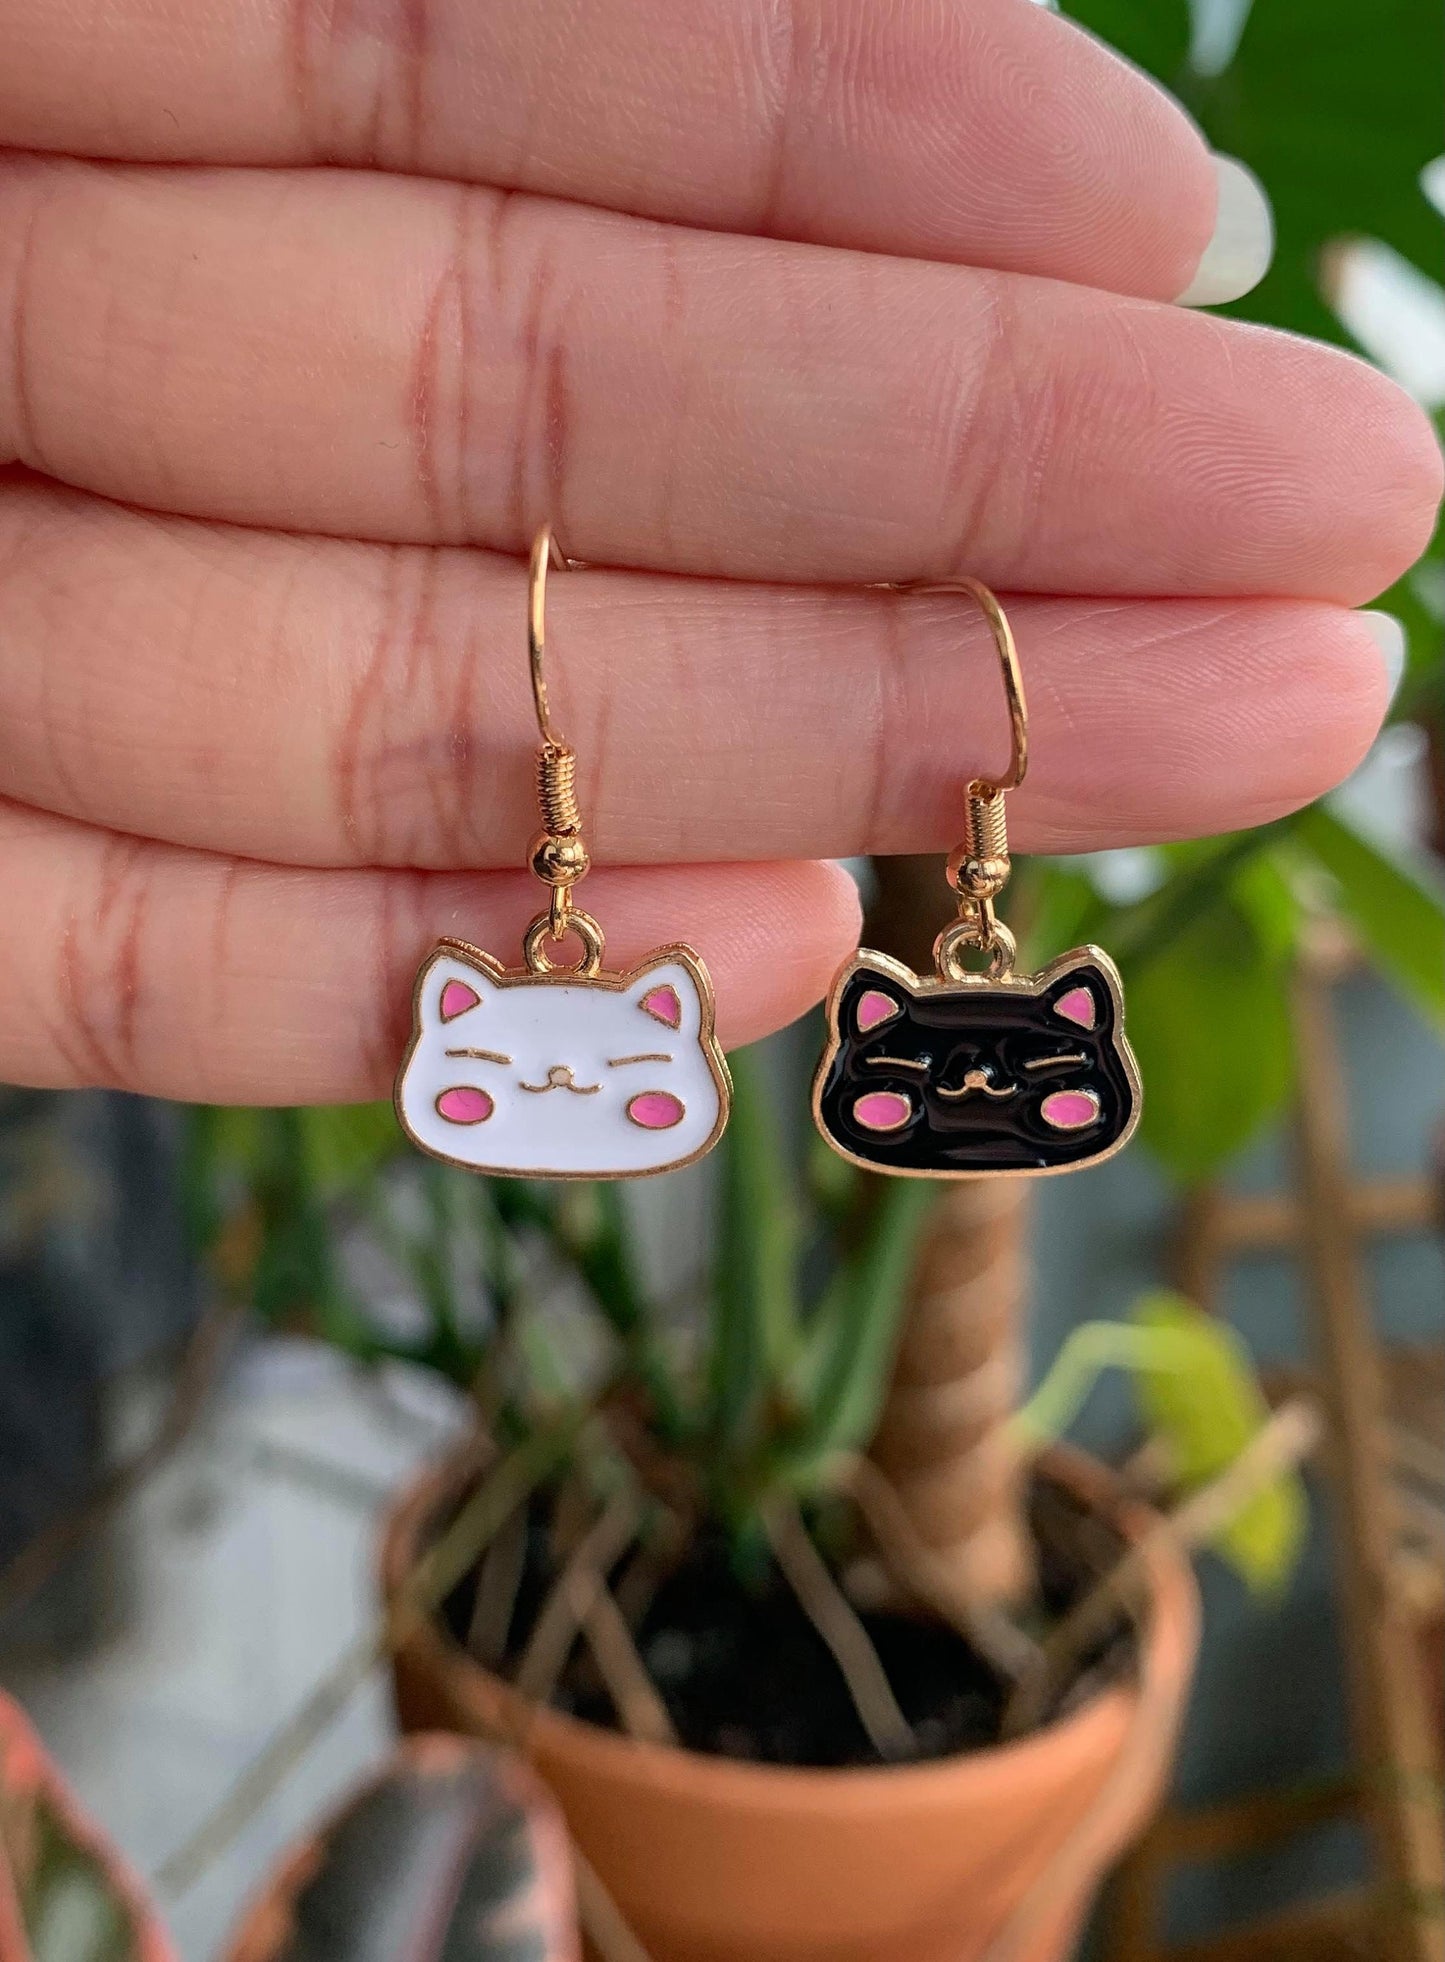 Unique Black and White Cat Earrings